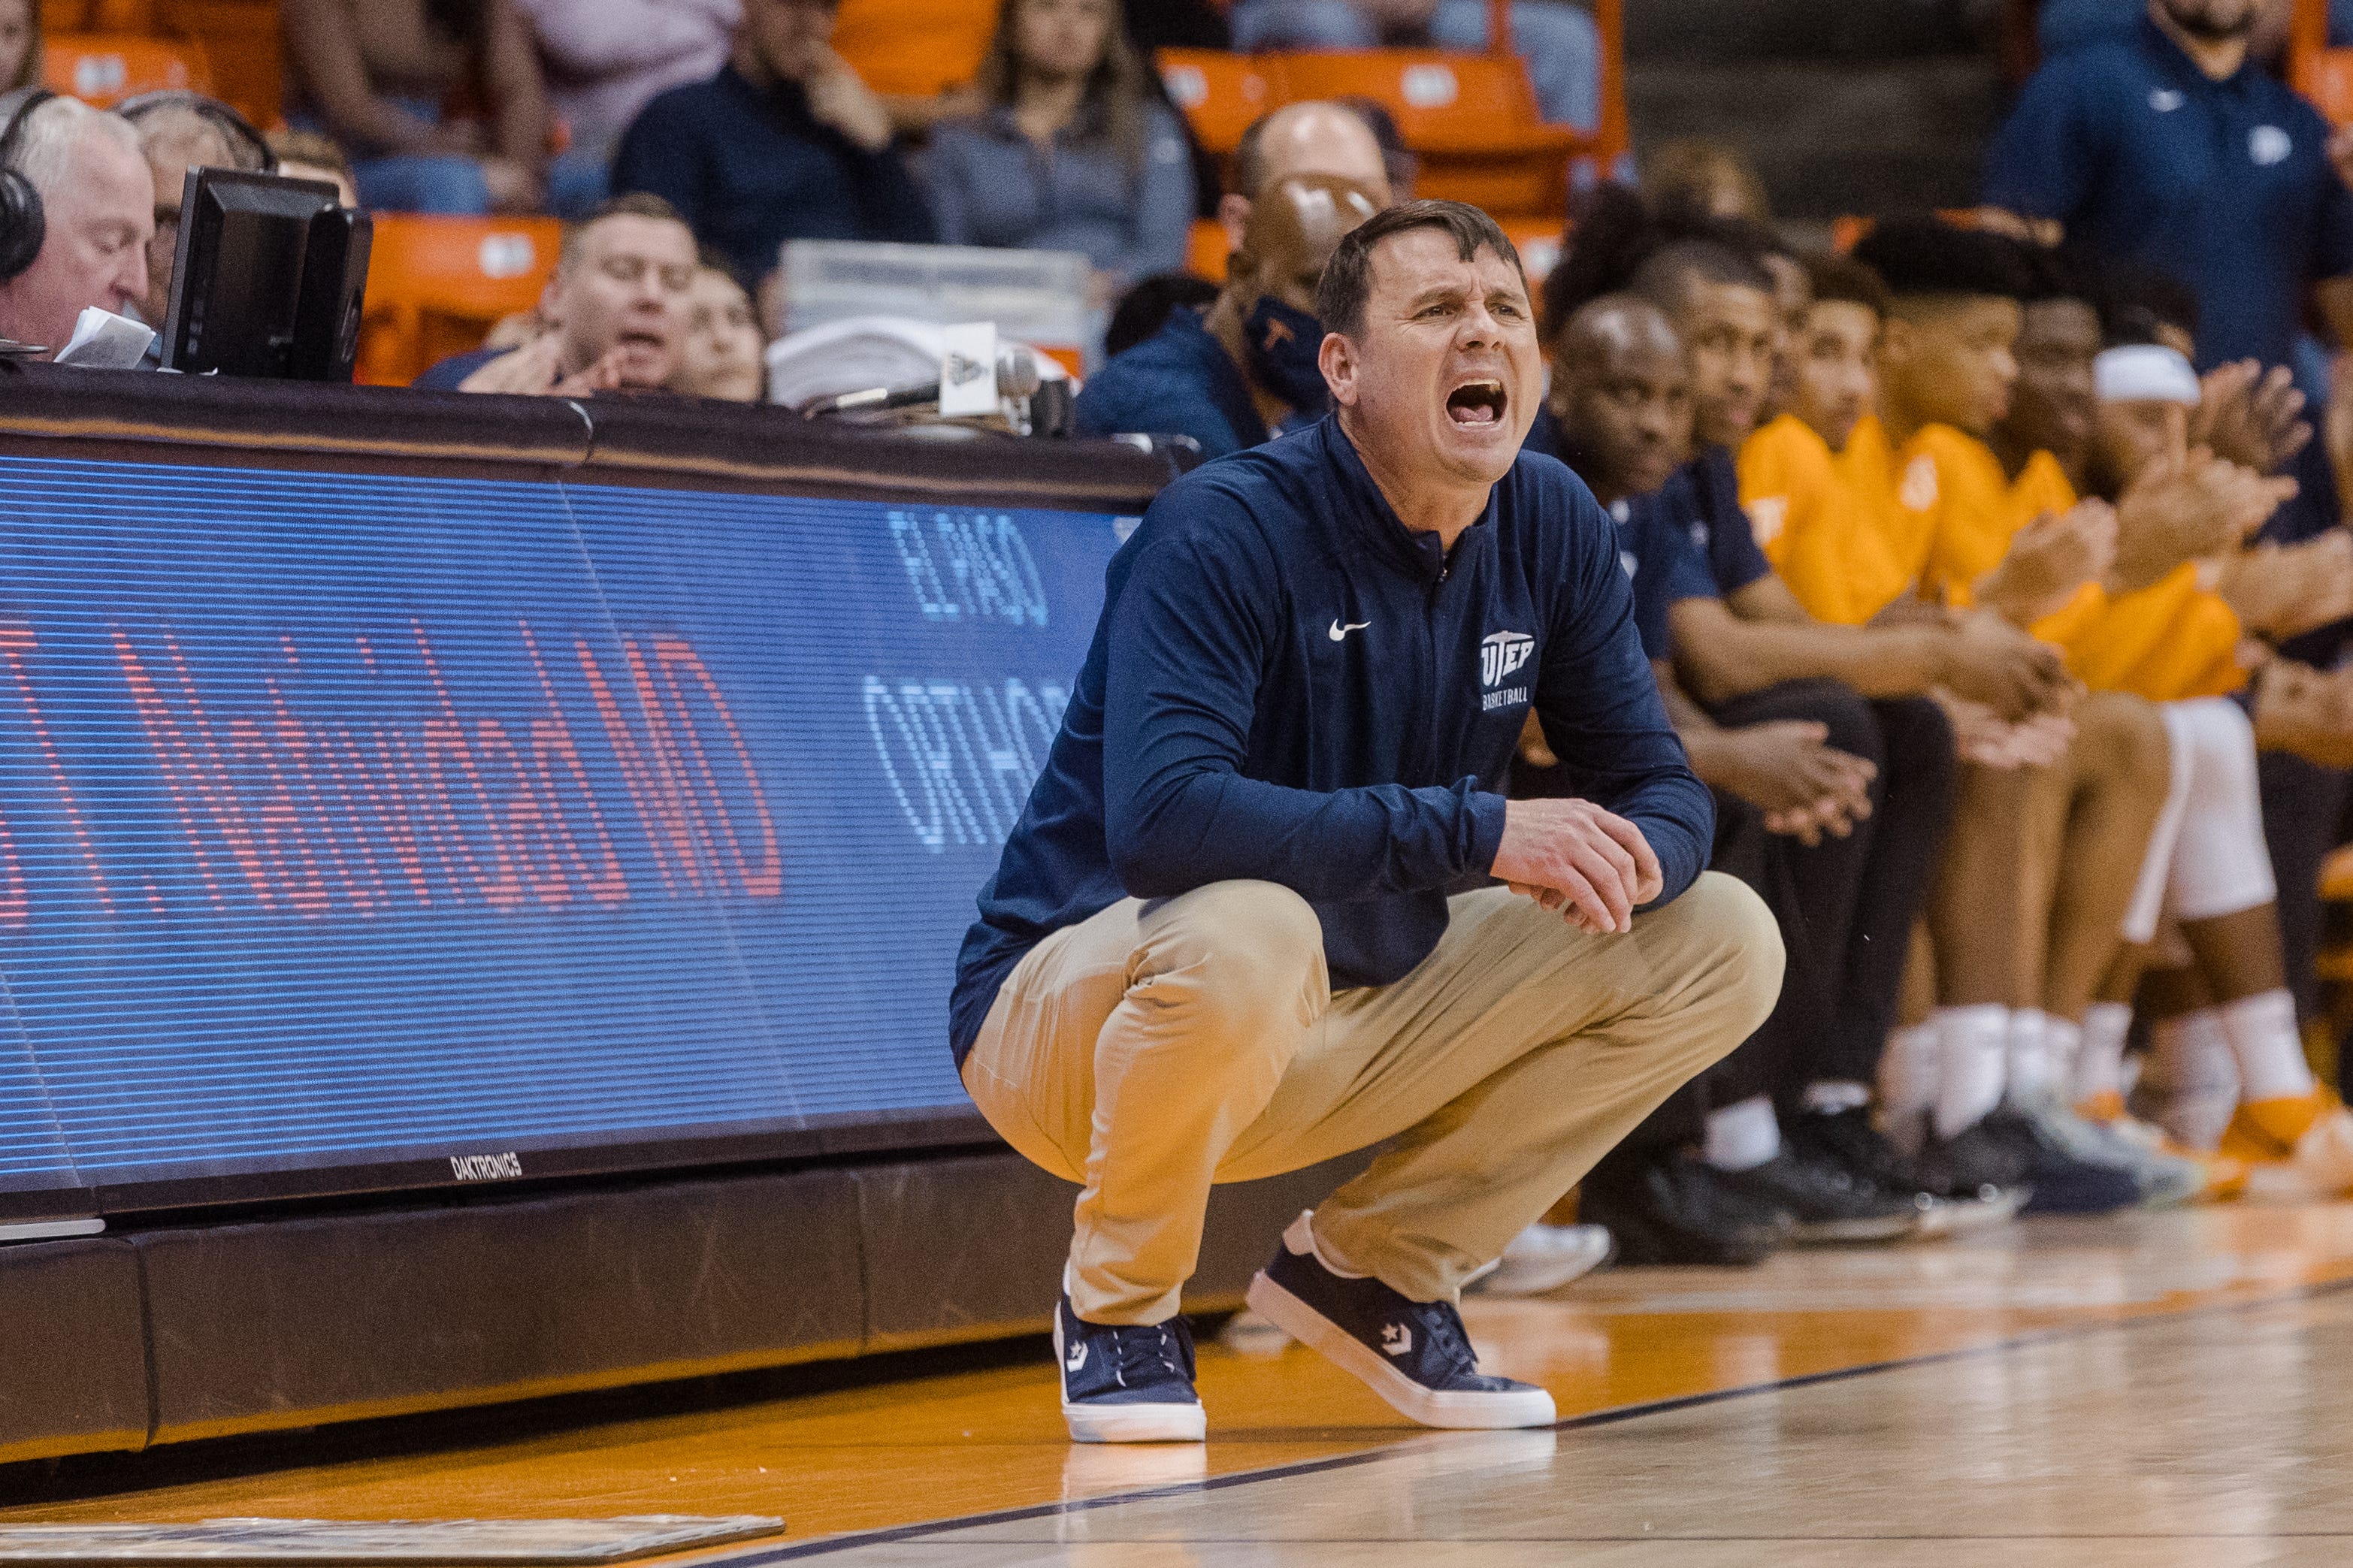 What to know: UTEP Miners men basketball team faces Old Dominion Monarchs